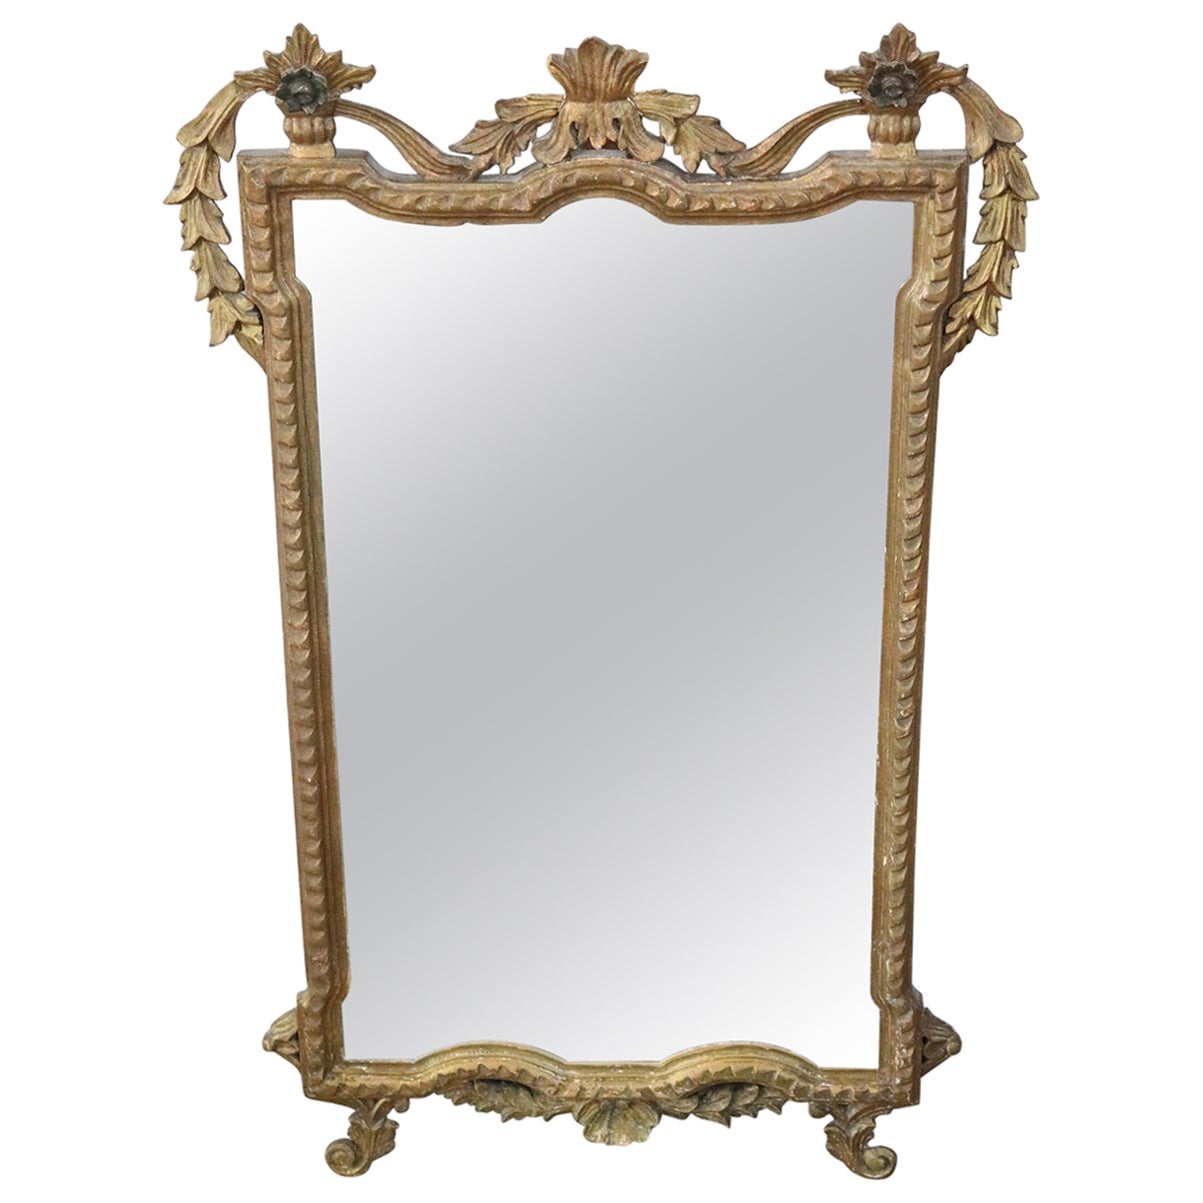 Early 20th Century Italian Louis XVI Style Carved and Gilded Wood Wall Mirror